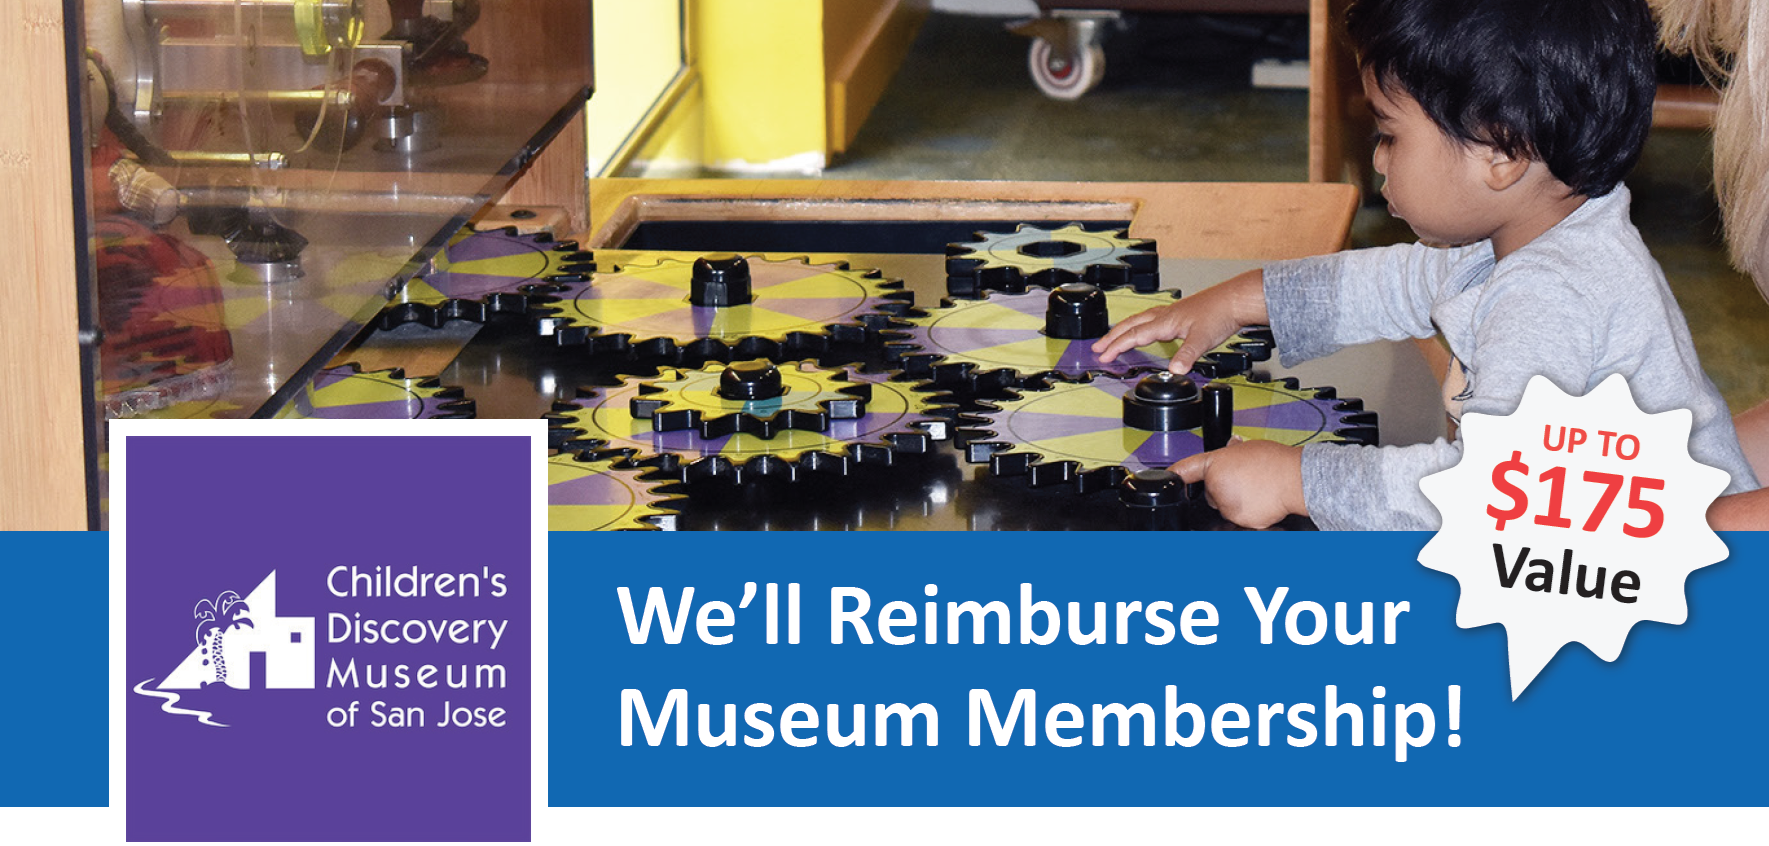 Children's Discovery Museum of San Jose logo | We’ll Reimburse Your Museum Membership! Up to $175 Value.